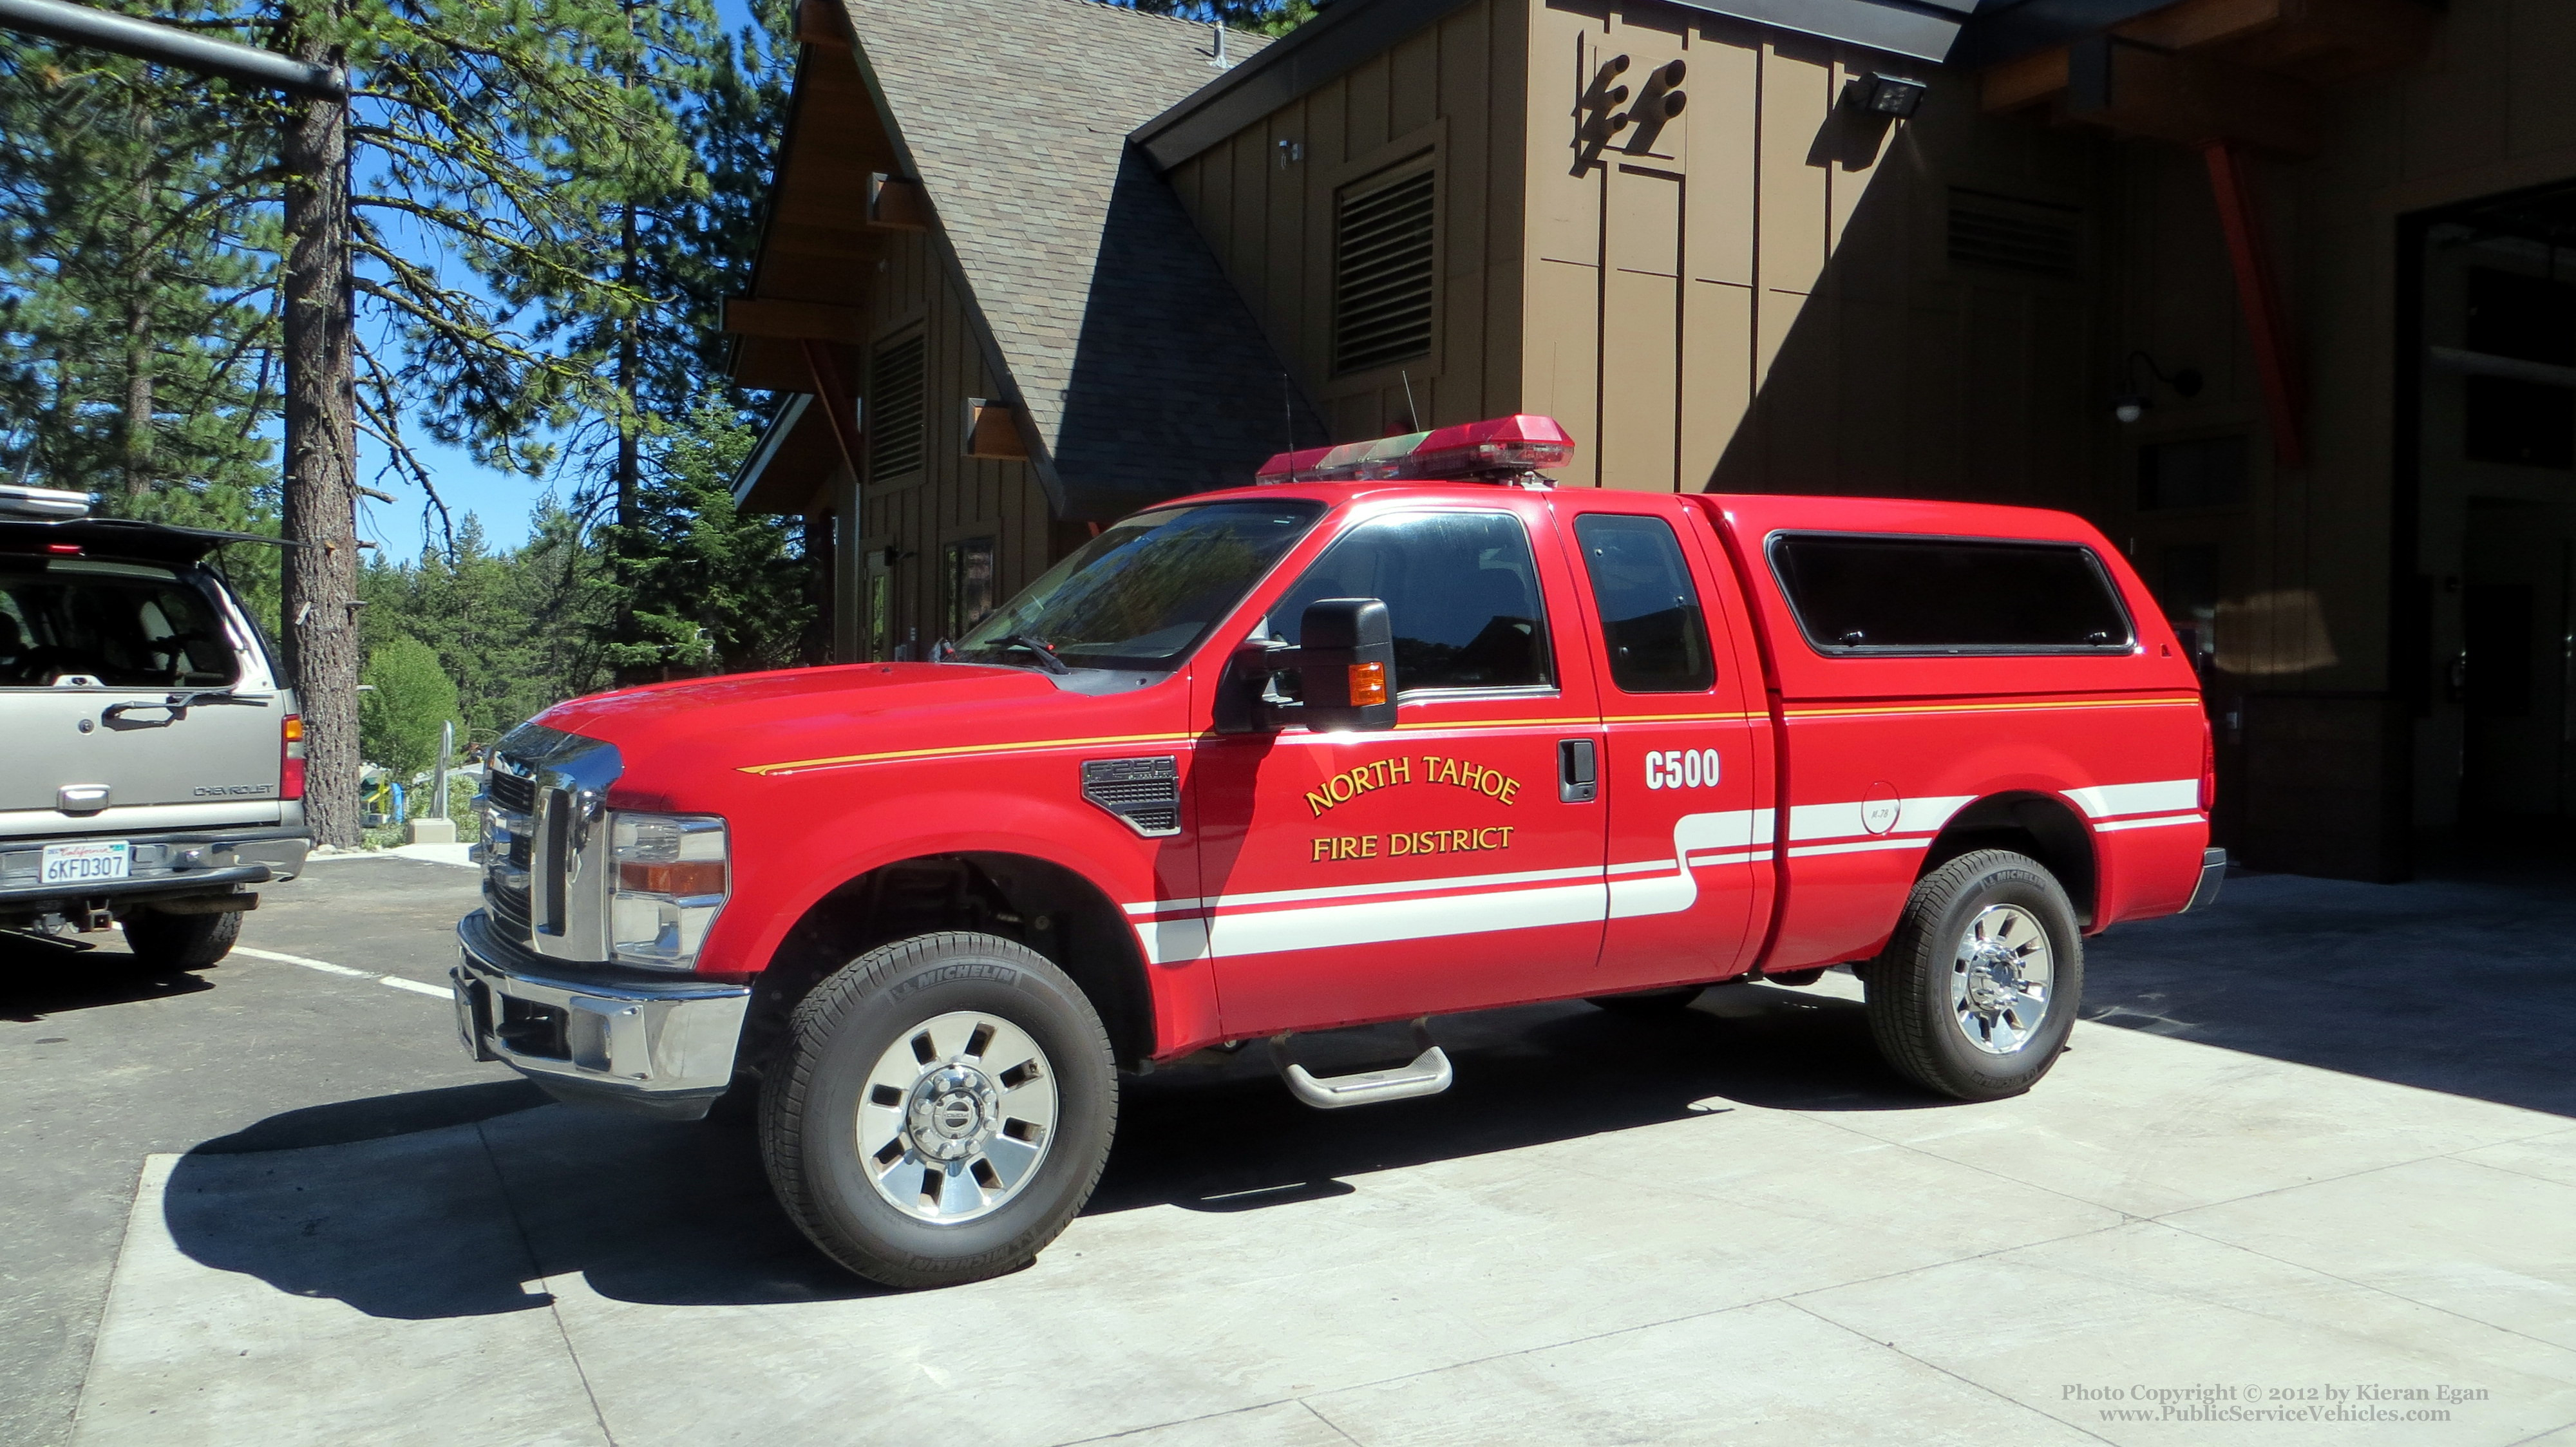 A photo  of North Tahoe Fire District
            Car 500, a 2009-2012 Ford F-150 Crew Cab             taken by Kieran Egan